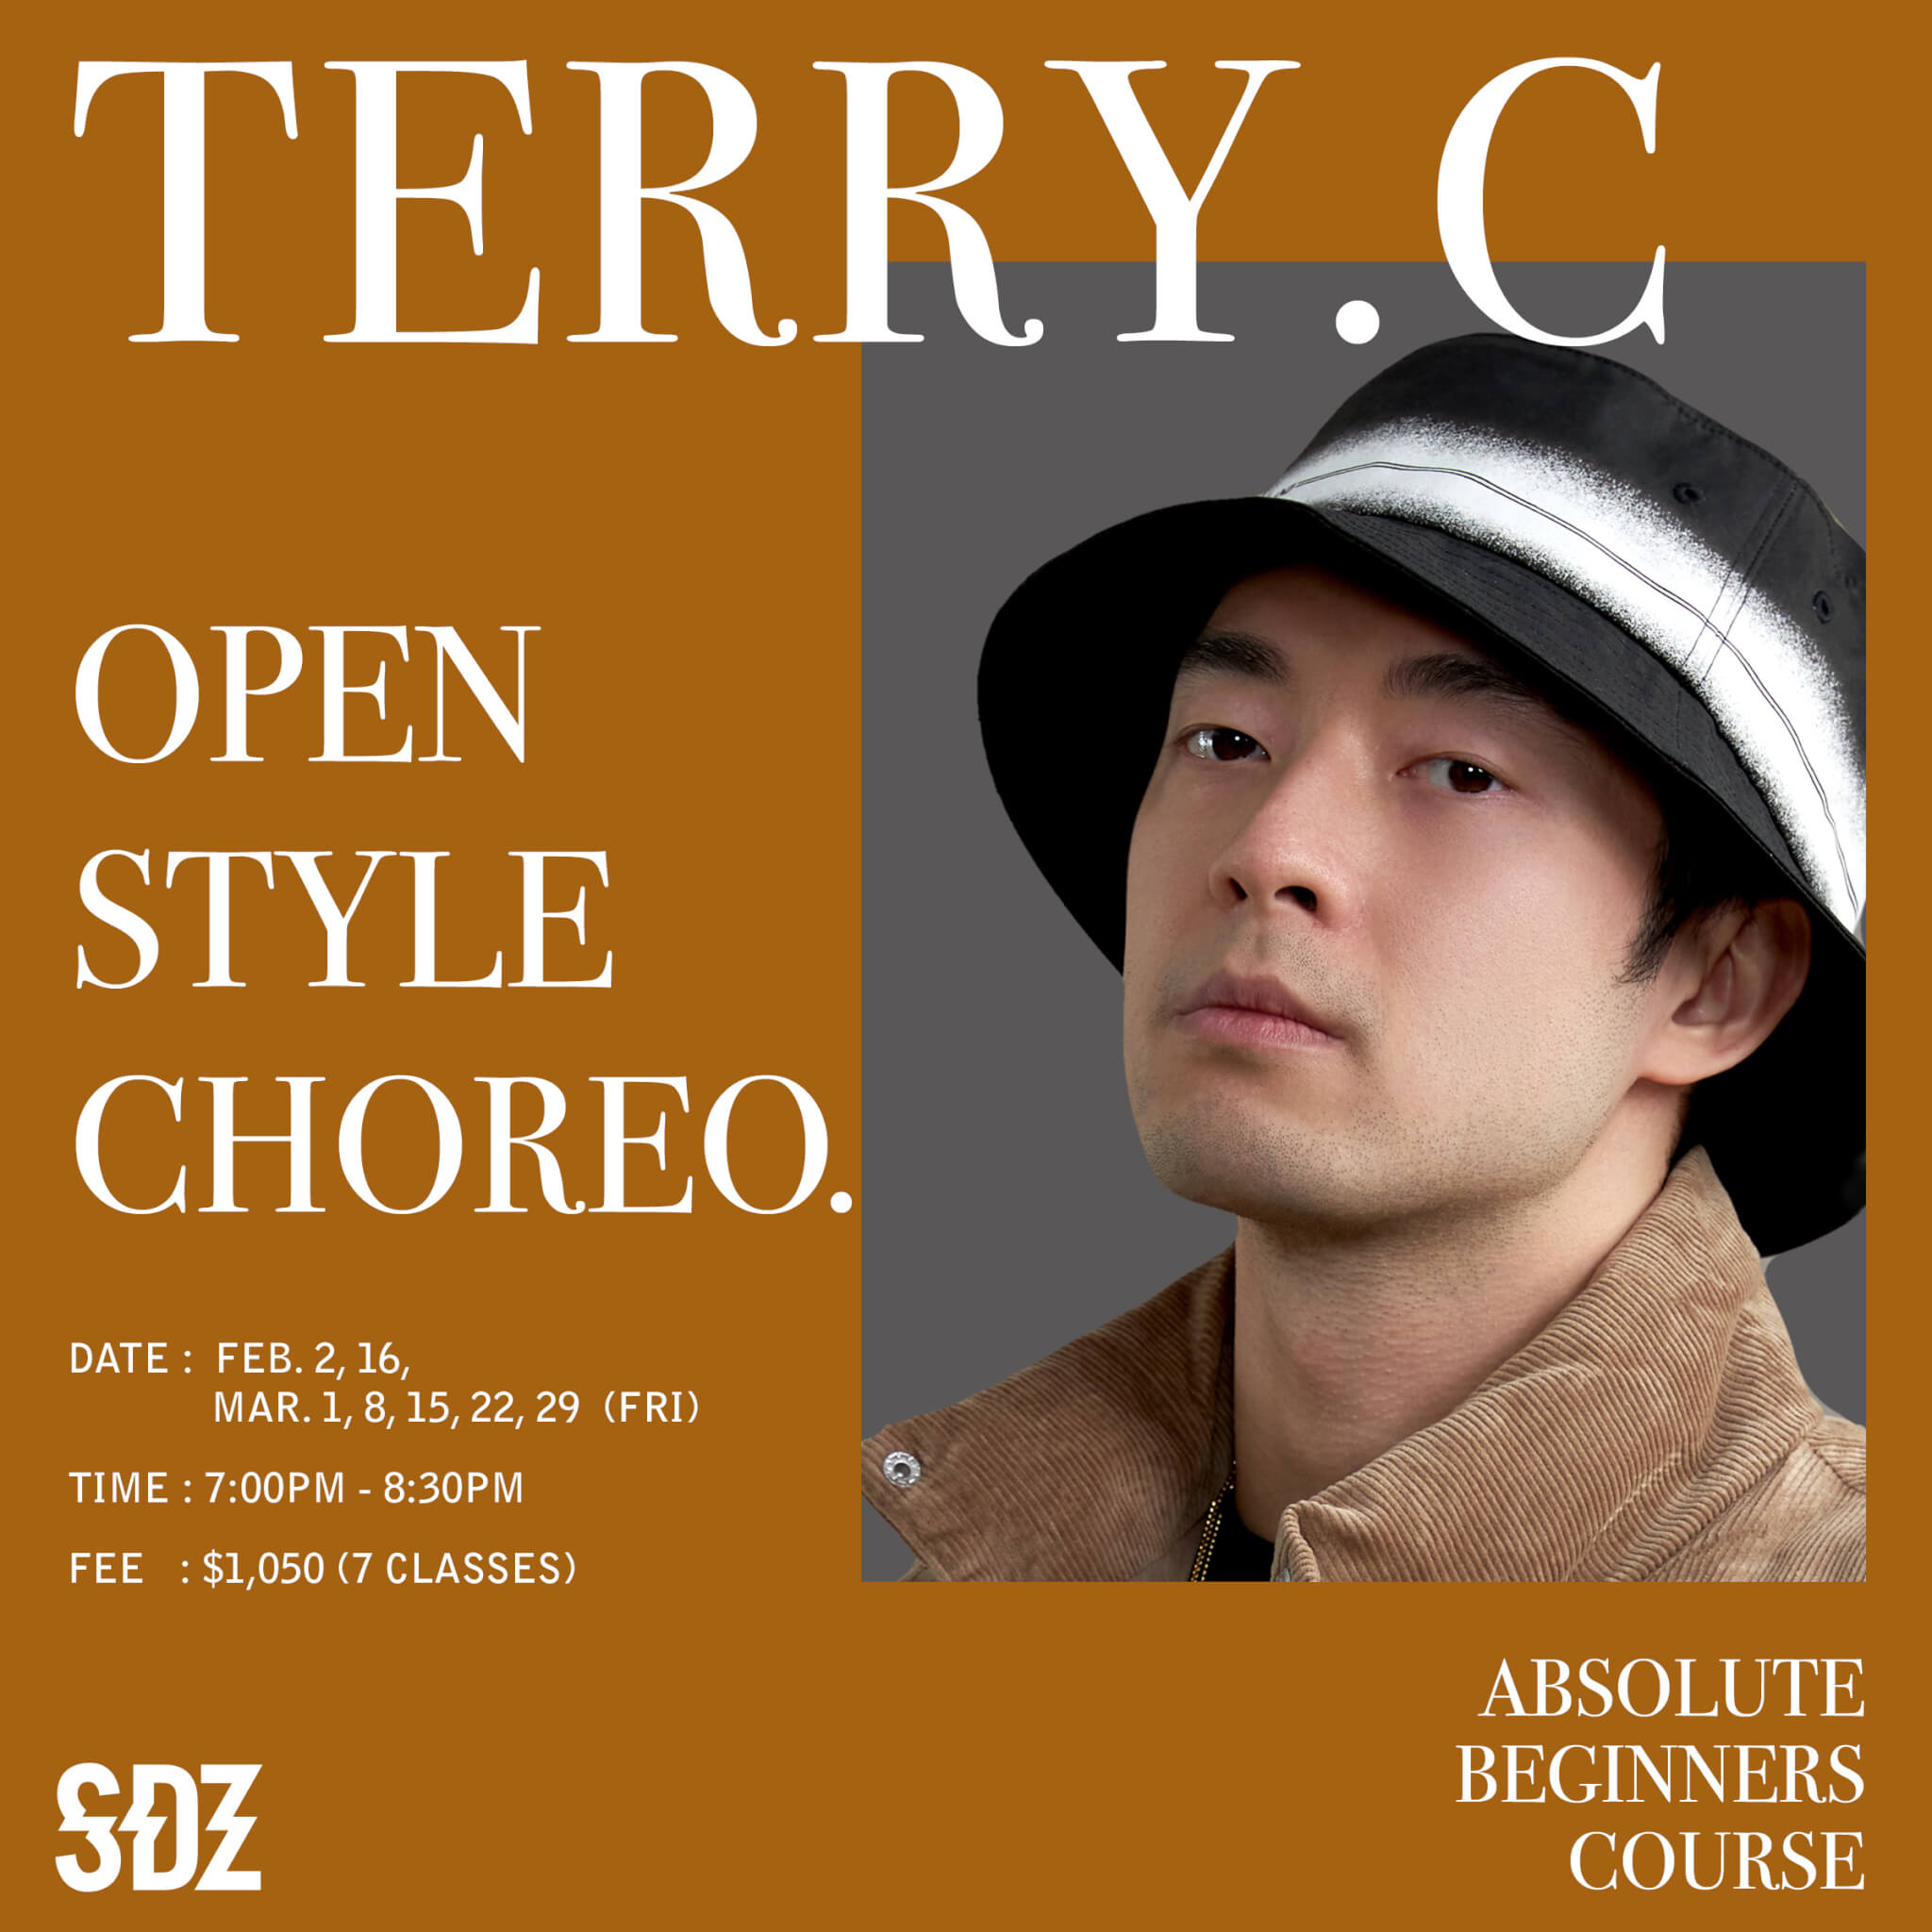 Absolute Beginners Course - Open Style Choreography - Terry.C